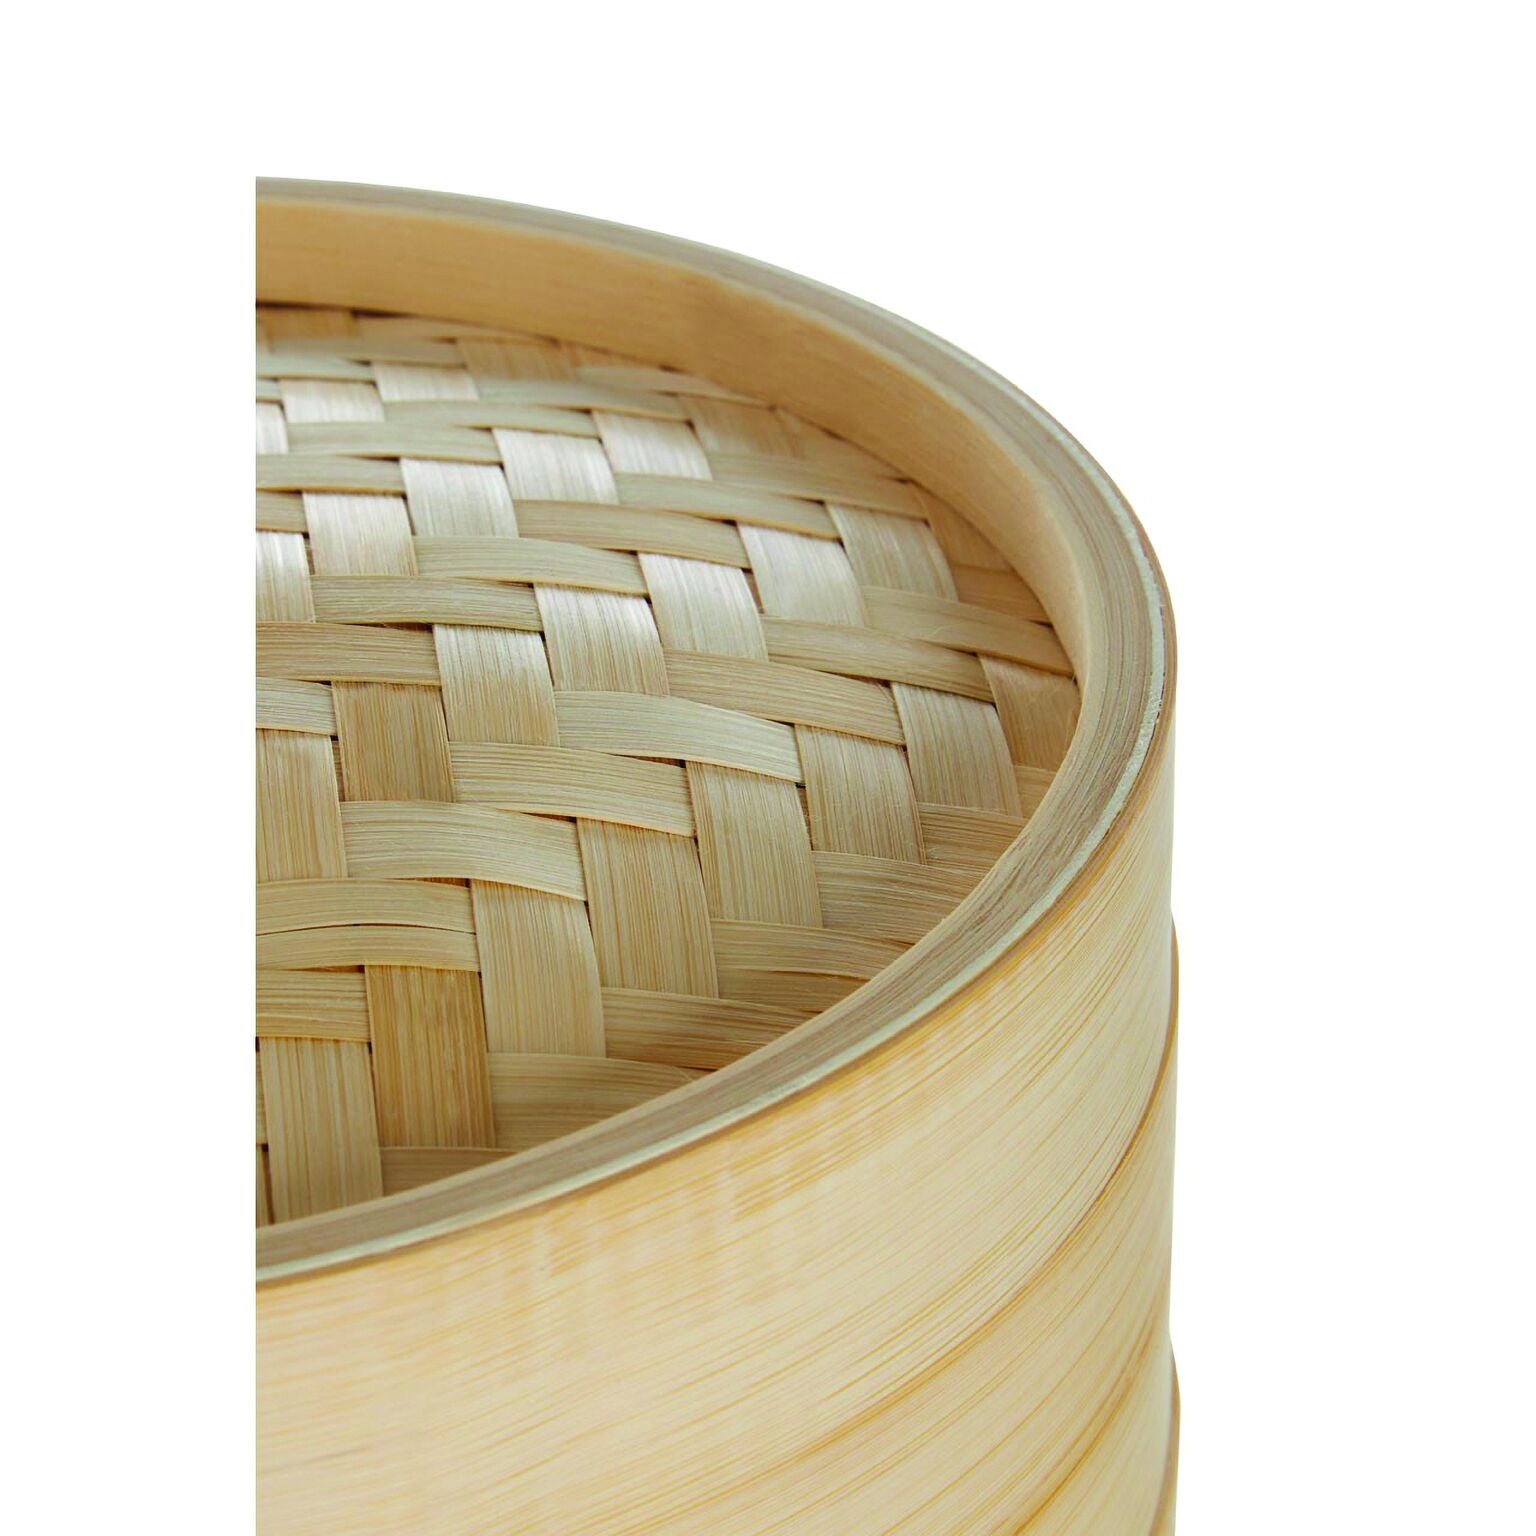 Large Round Bamboo Steamer